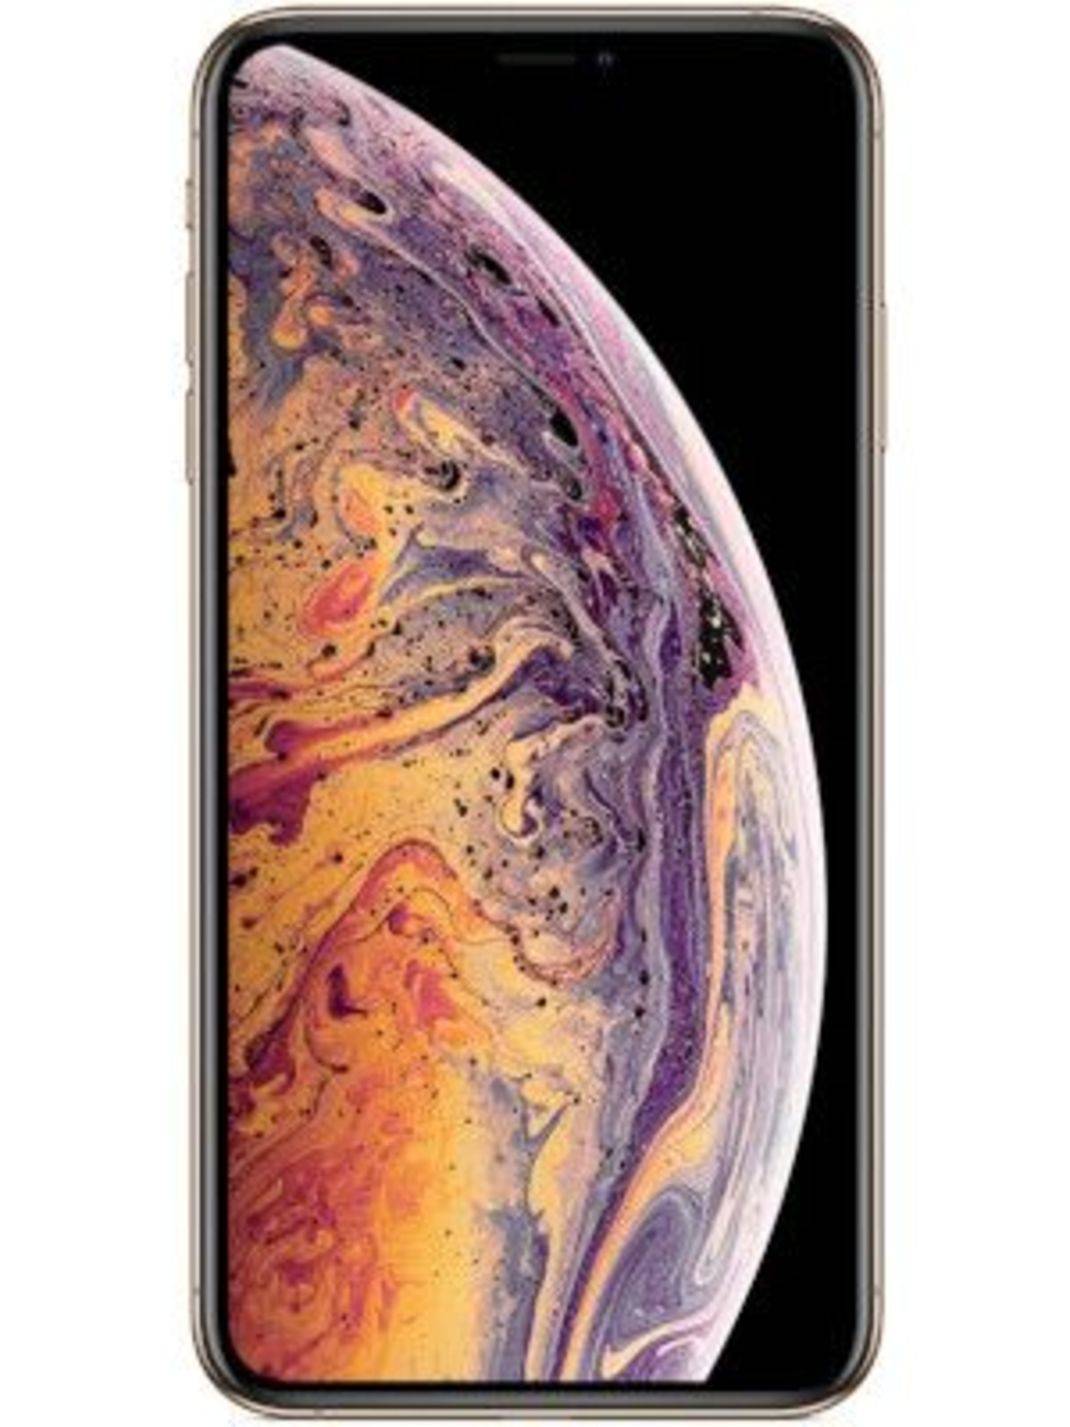 Compare Apple Iphone Xs Max Vs Samsung Galaxy Note 10 Plus Galaxy Note 10 Pro Price Specs Review Gadgets Now